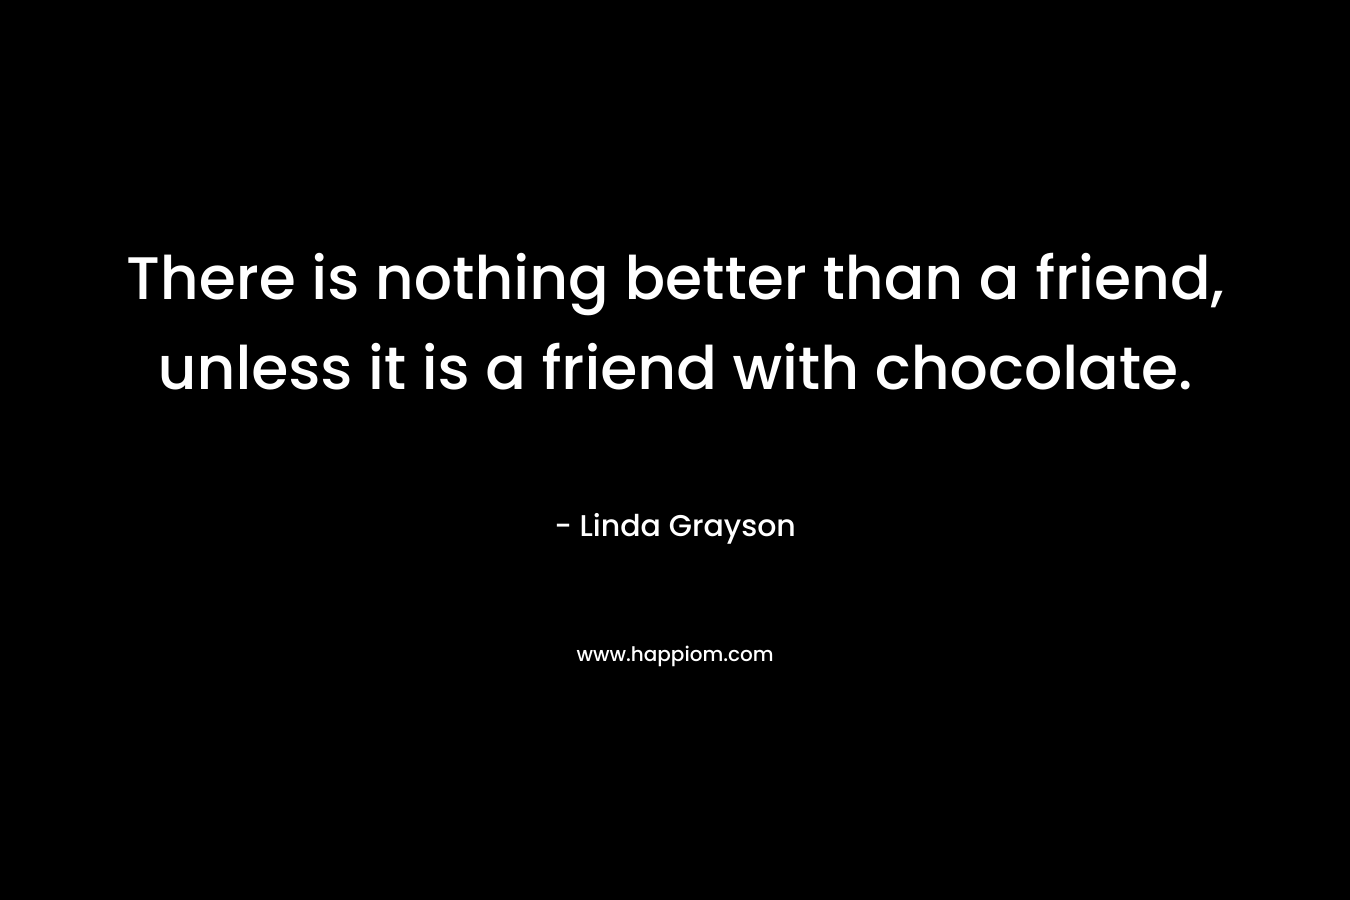 There is nothing better than a friend, unless it is a friend with chocolate.